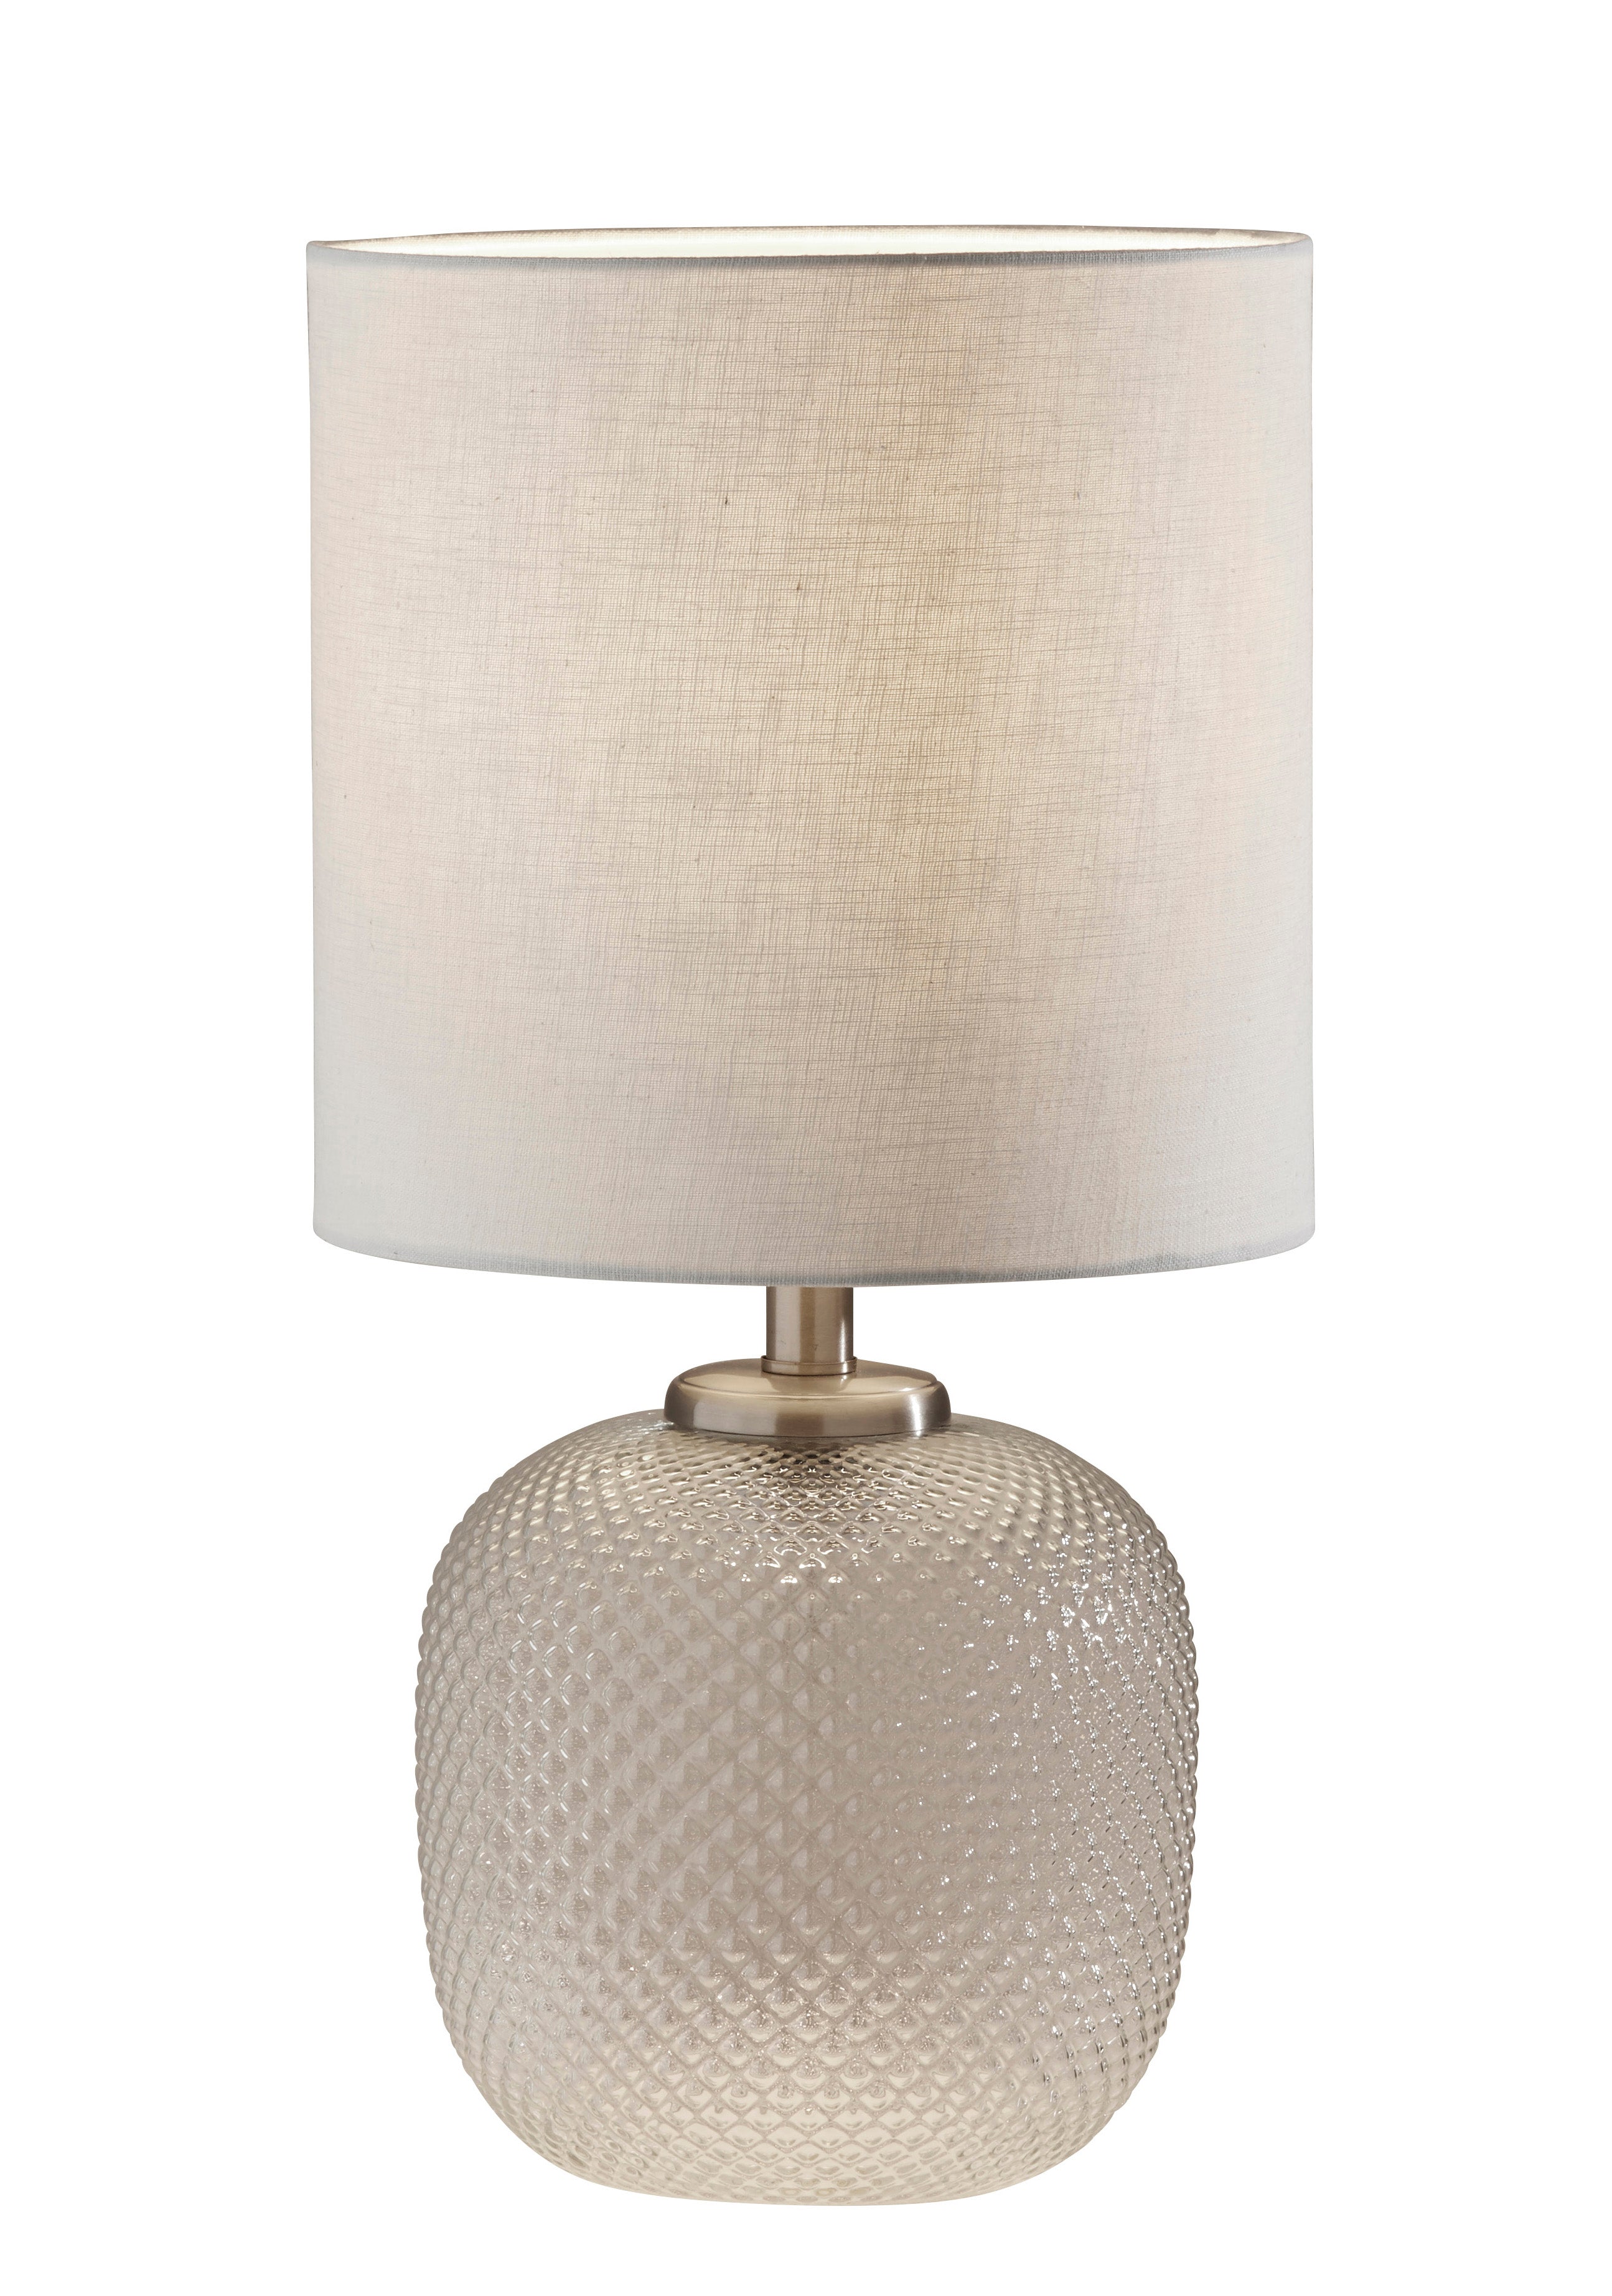 VIVIAN Table lamp Stainless steel - 3576-22 | ADESSO